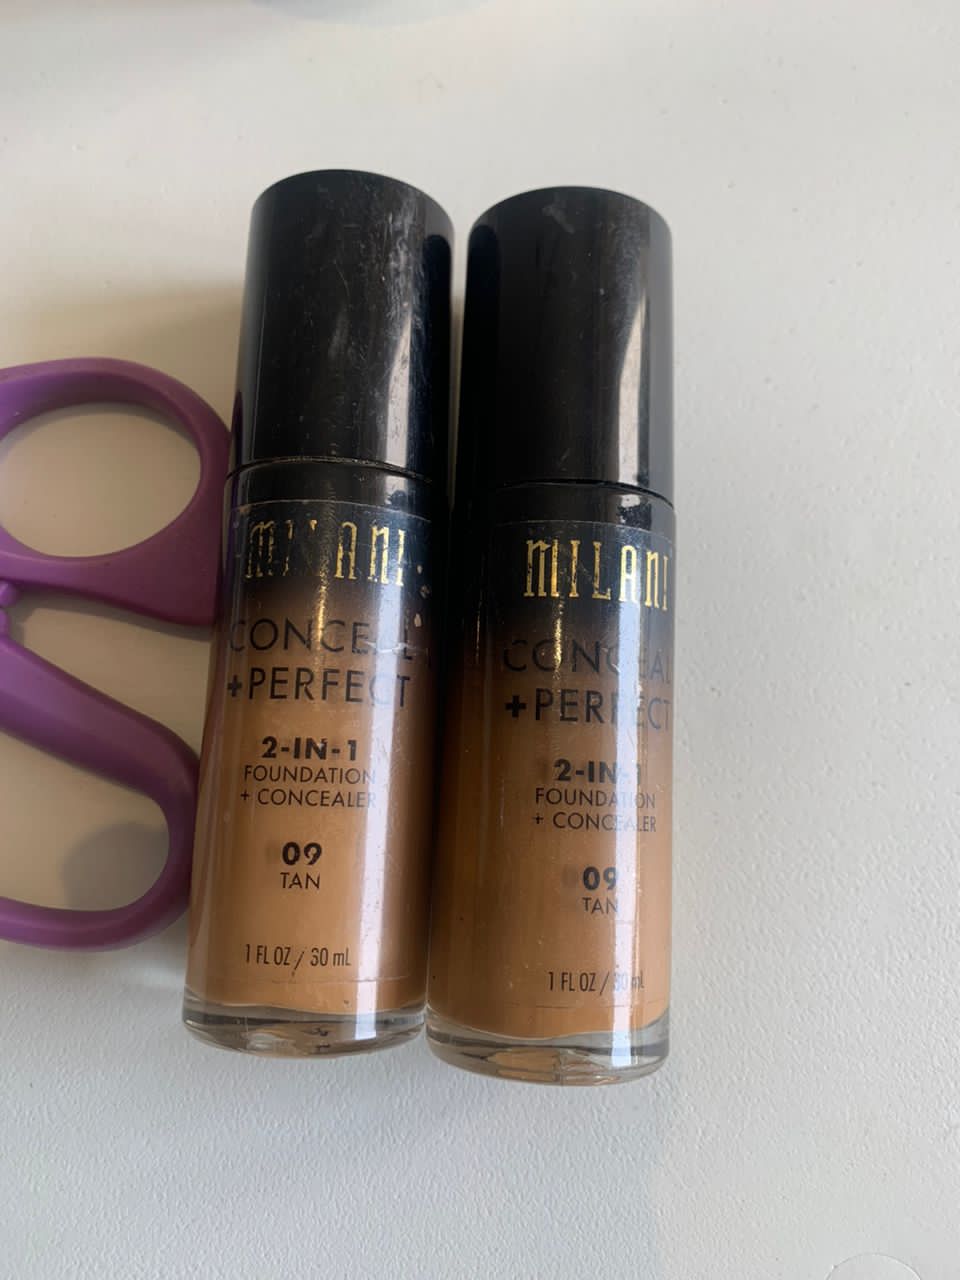 Milani Conceal + Perfect 2-in-1 Foundation + Concealer Tan 09 (Brand New but body is rough- See picture) - Ome's Beauty Mart